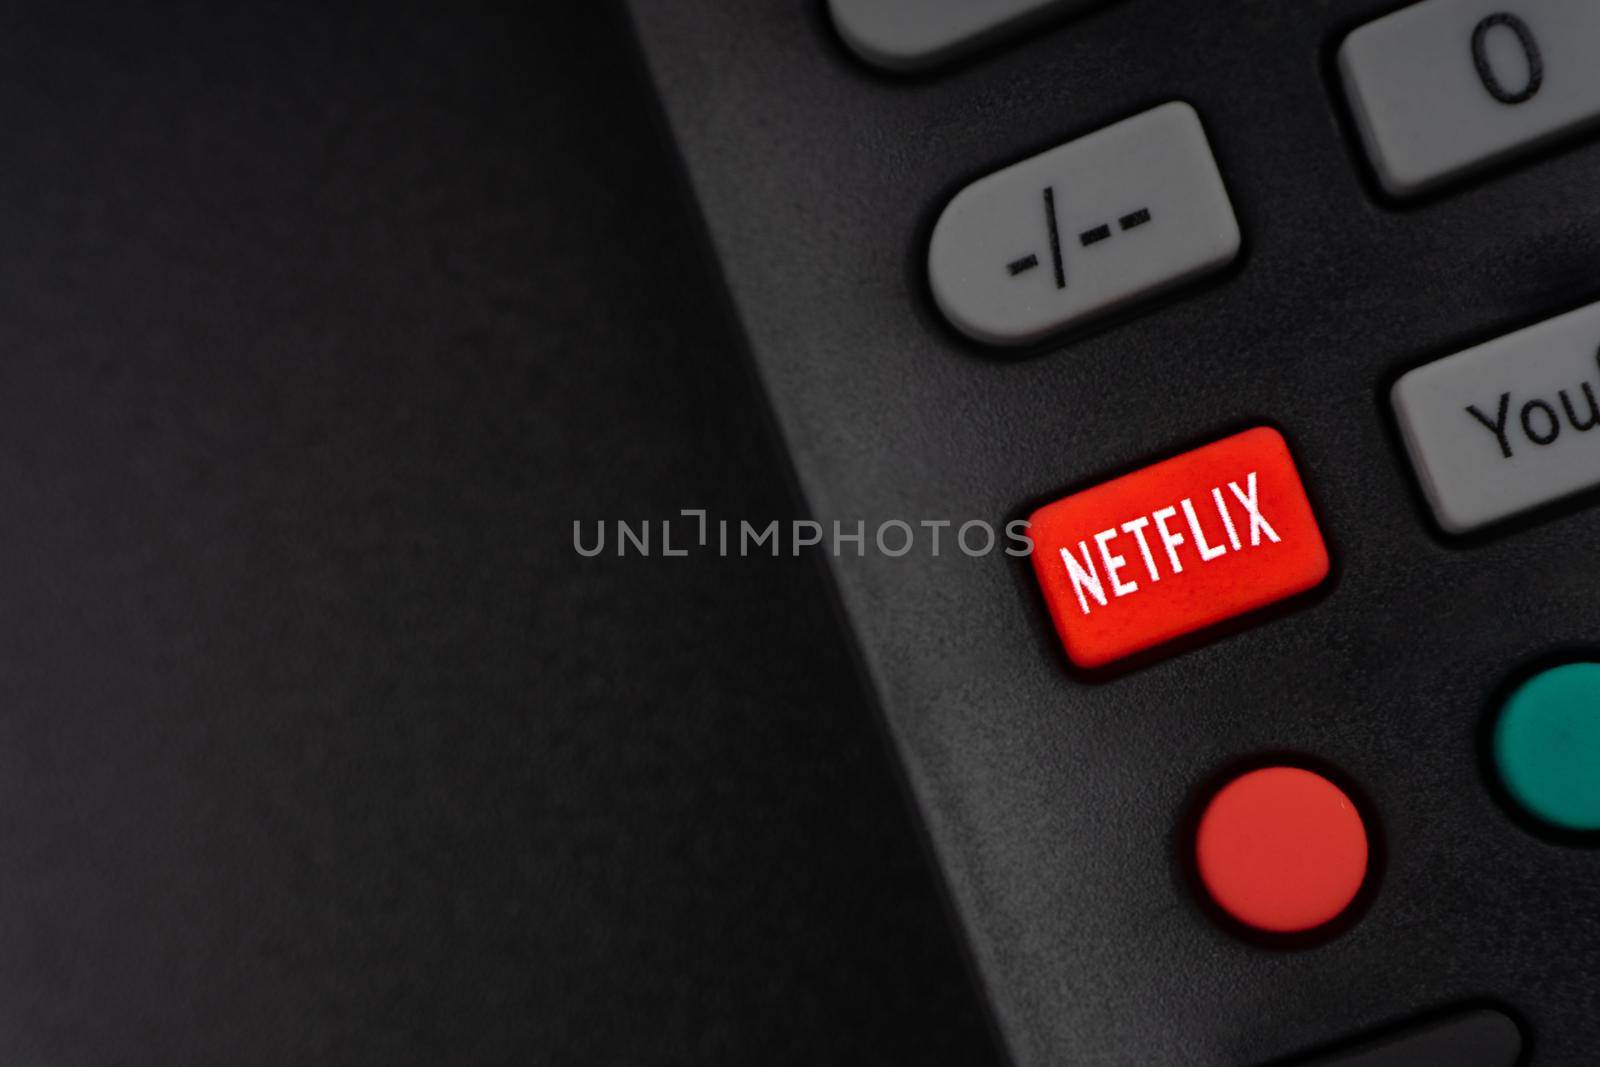 NETFLIX television remote controller on black background by silverwings